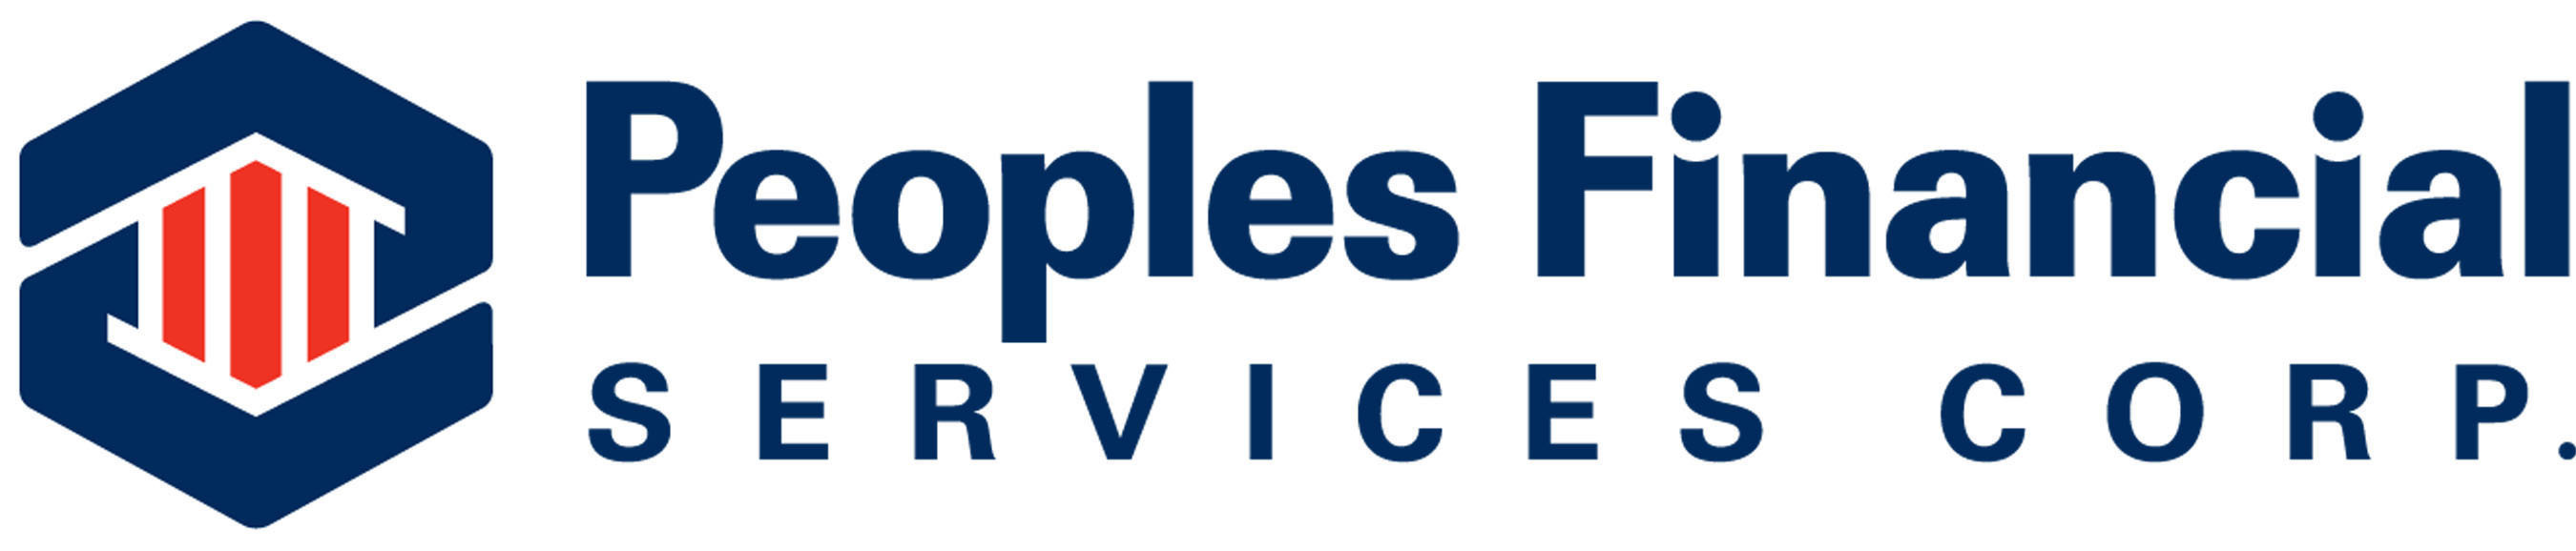 Peoples Financial Services Corp. Logo.